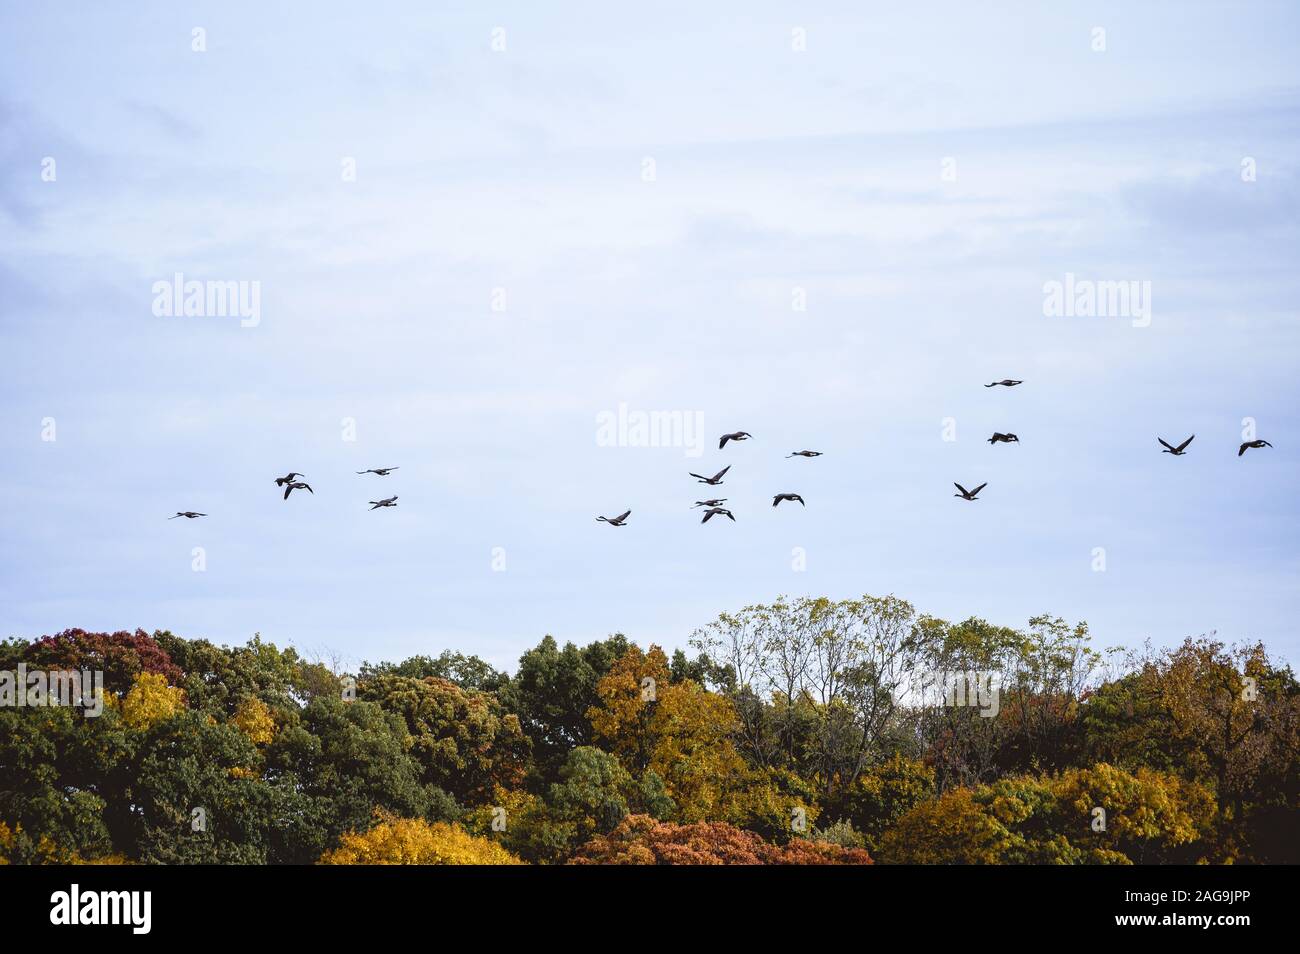 Beautiful shot of birds flying over trees with a blue sky in the background Stock Photo